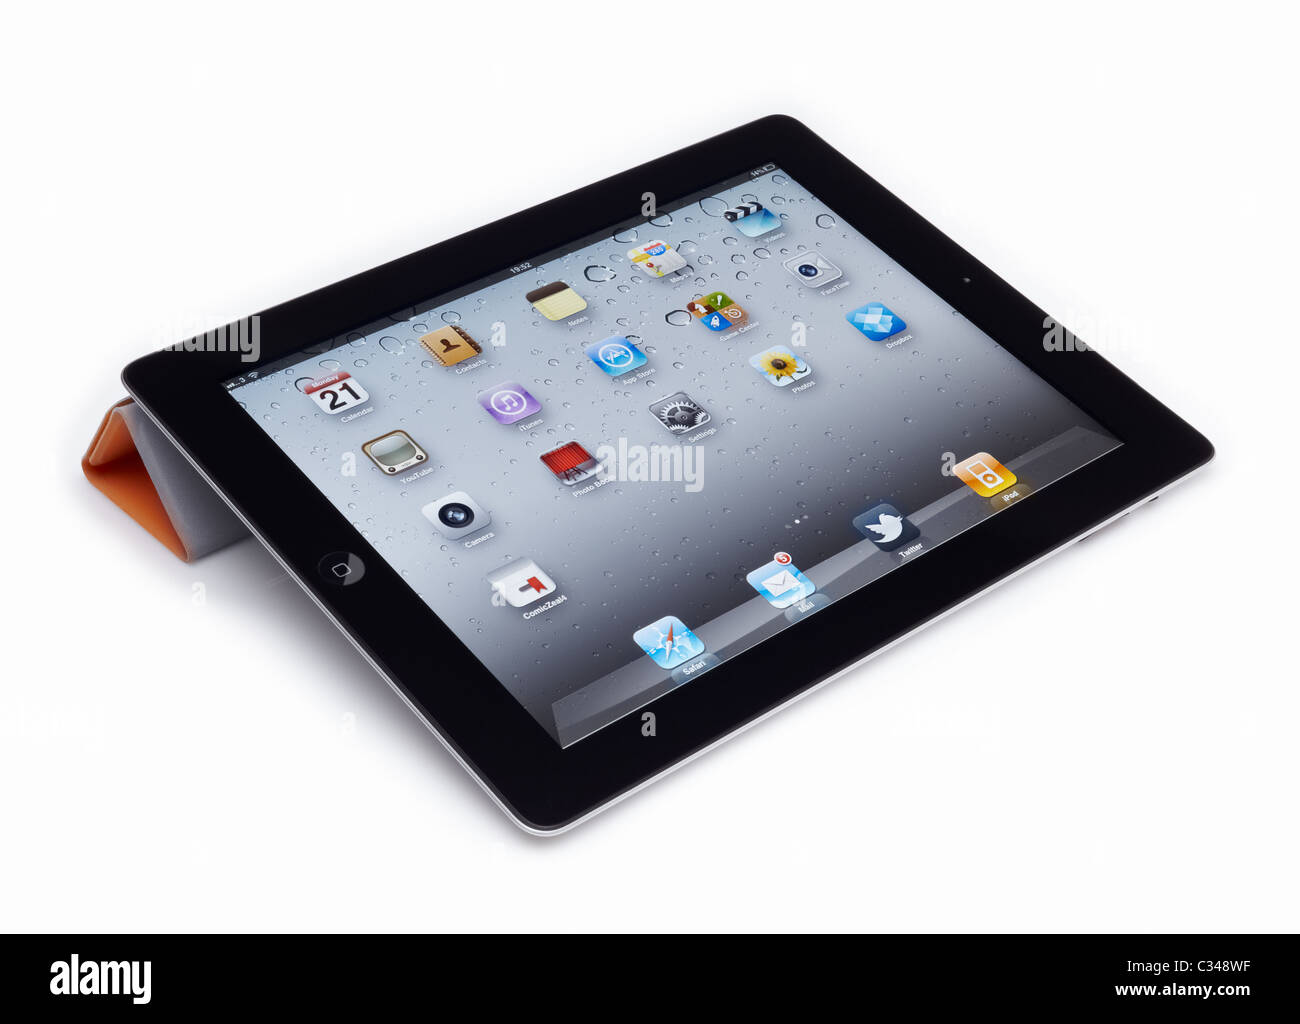 Apple iPad 2 with Smart Cover cut out on a white background with reflection and clipping path. Stock Photo